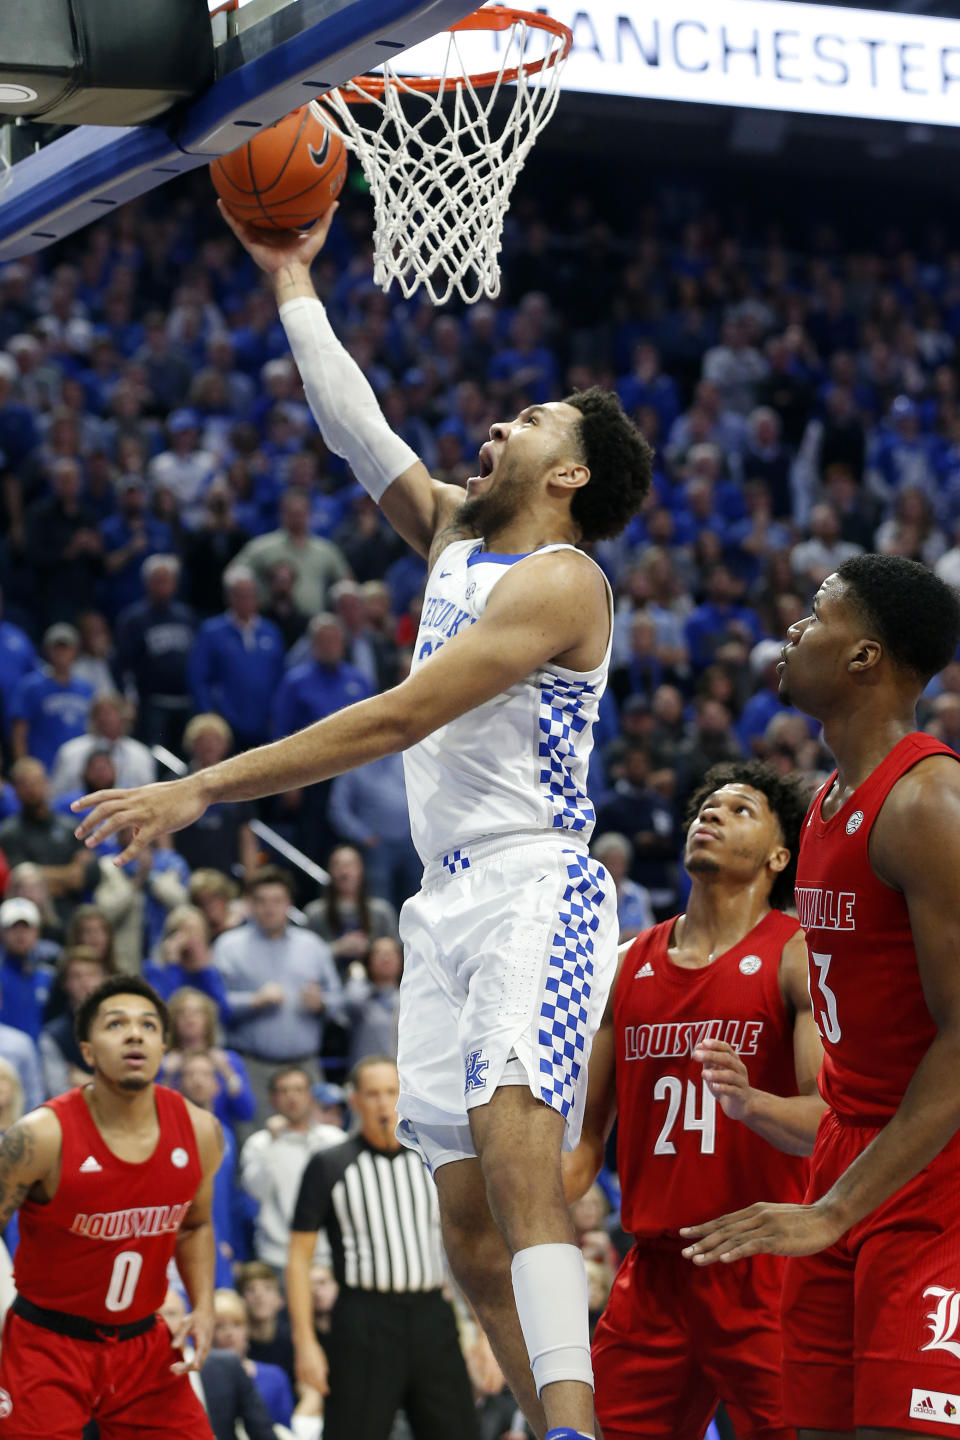 Kentucky's EJ Montgomery, middle, shoots between Louisville's Lamarr Kimble (0), Dwayne Sutton (24) and Steven Enoch (23) during the first half of an NCAA college basketball game in Lexington, Ky., Saturday, Dec. 28, 2019. (AP Photo/James Crisp)